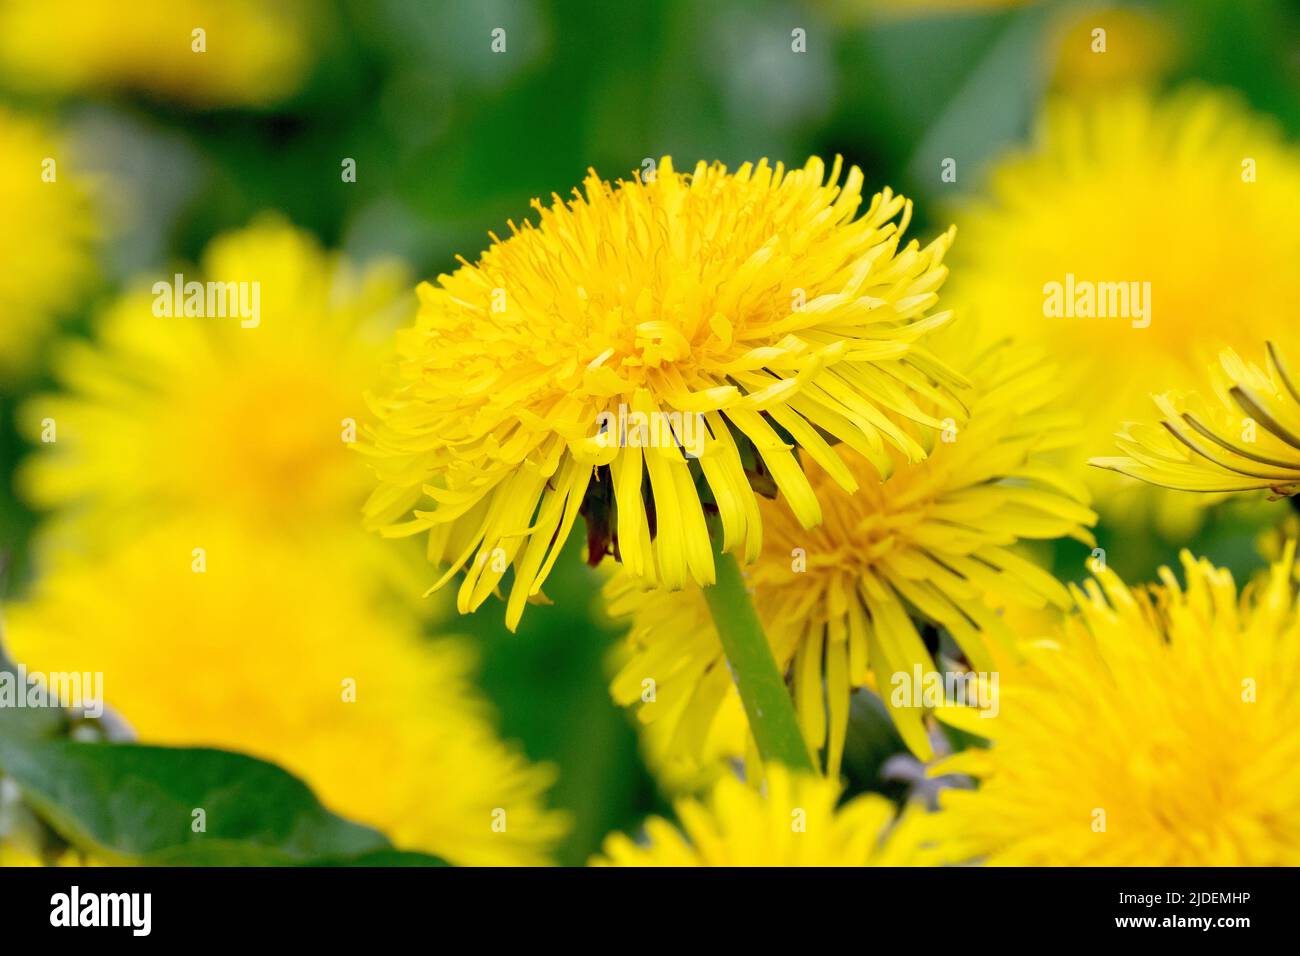 Dandelion (taraxacum officinalis), close up focusing on a single flower of the common bright yellow wildflower growing in on a roadside verge. Stock Photo